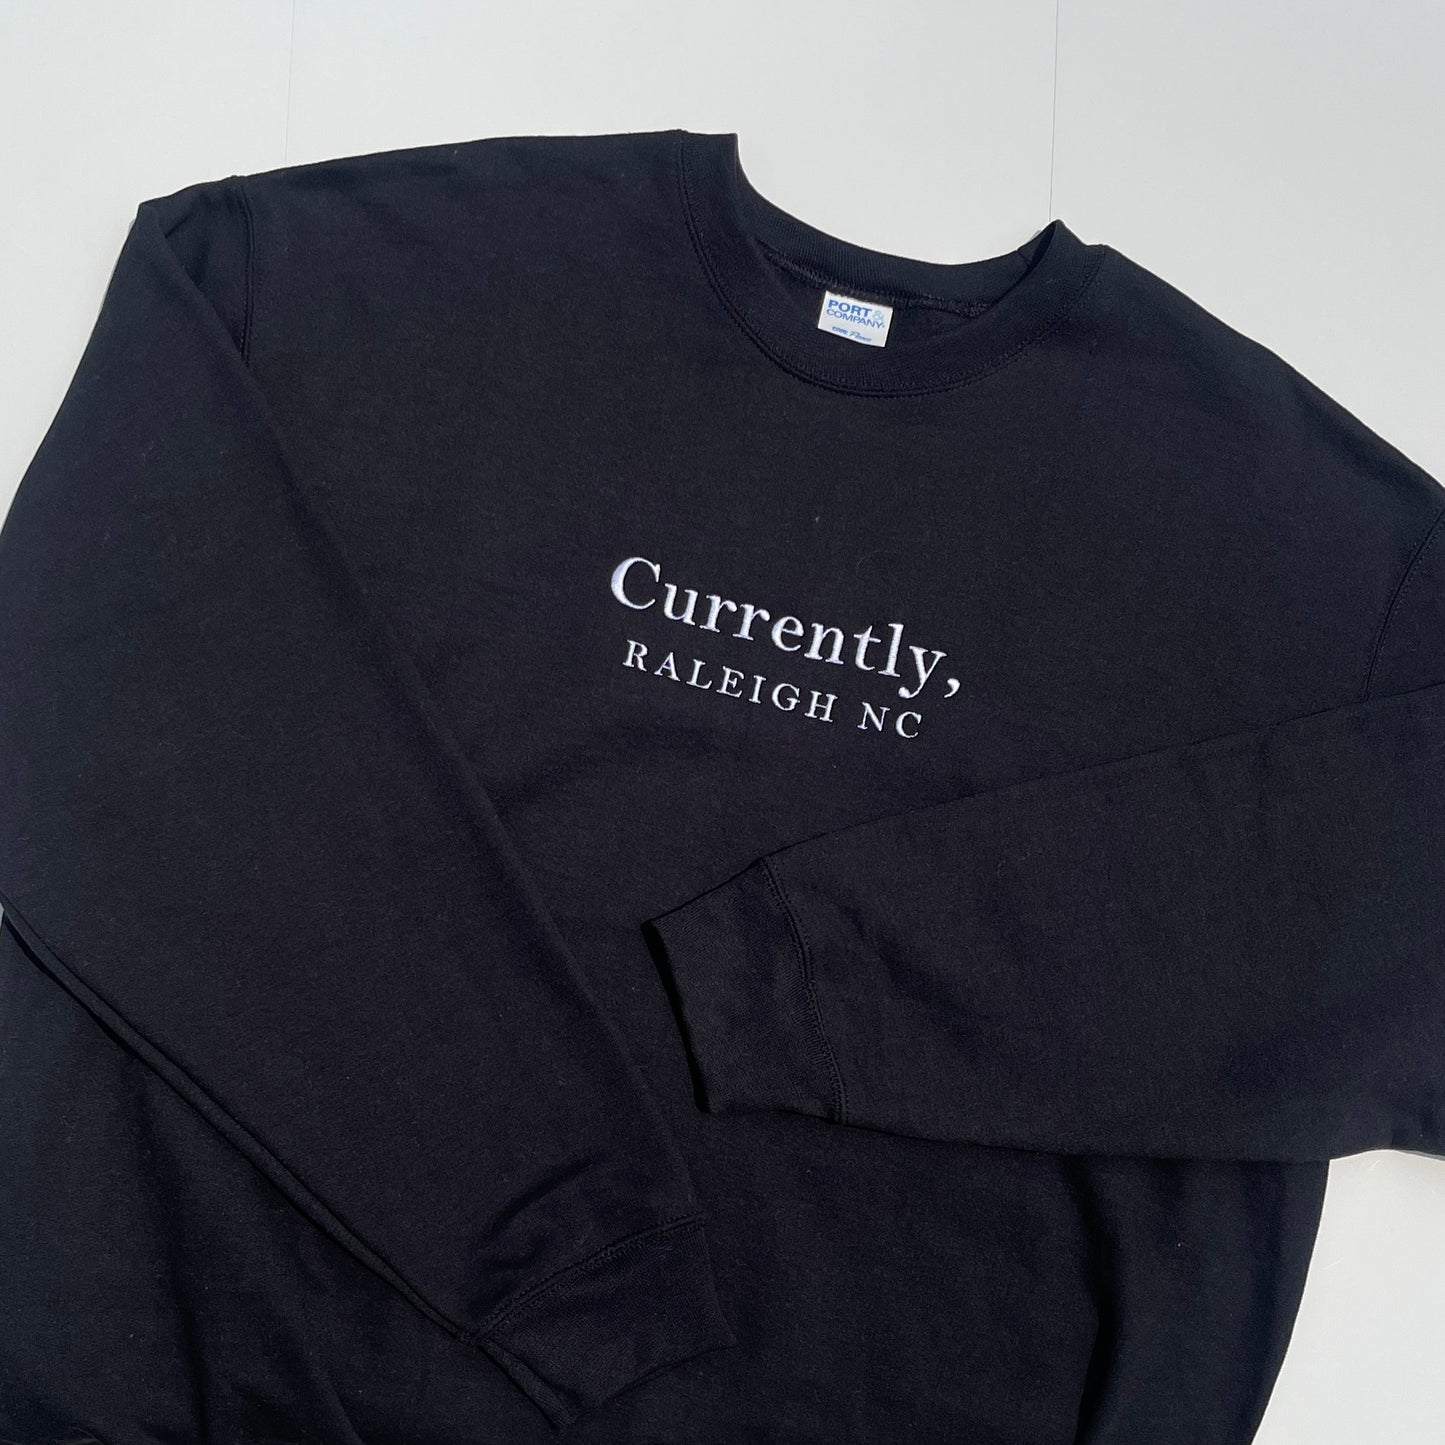 Currently Cities Embroidered Sweatshirt